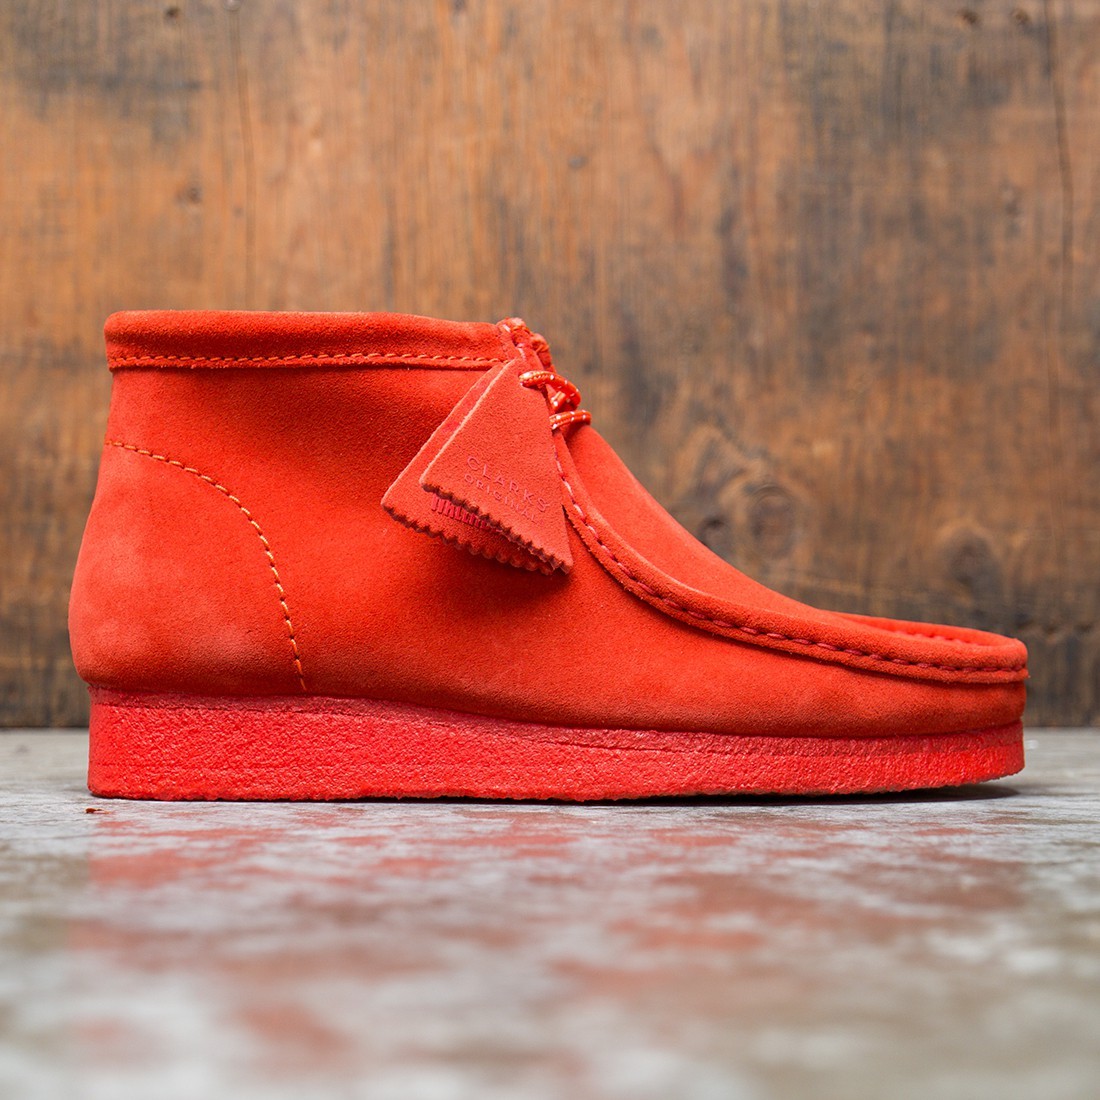 red wallabees shoes